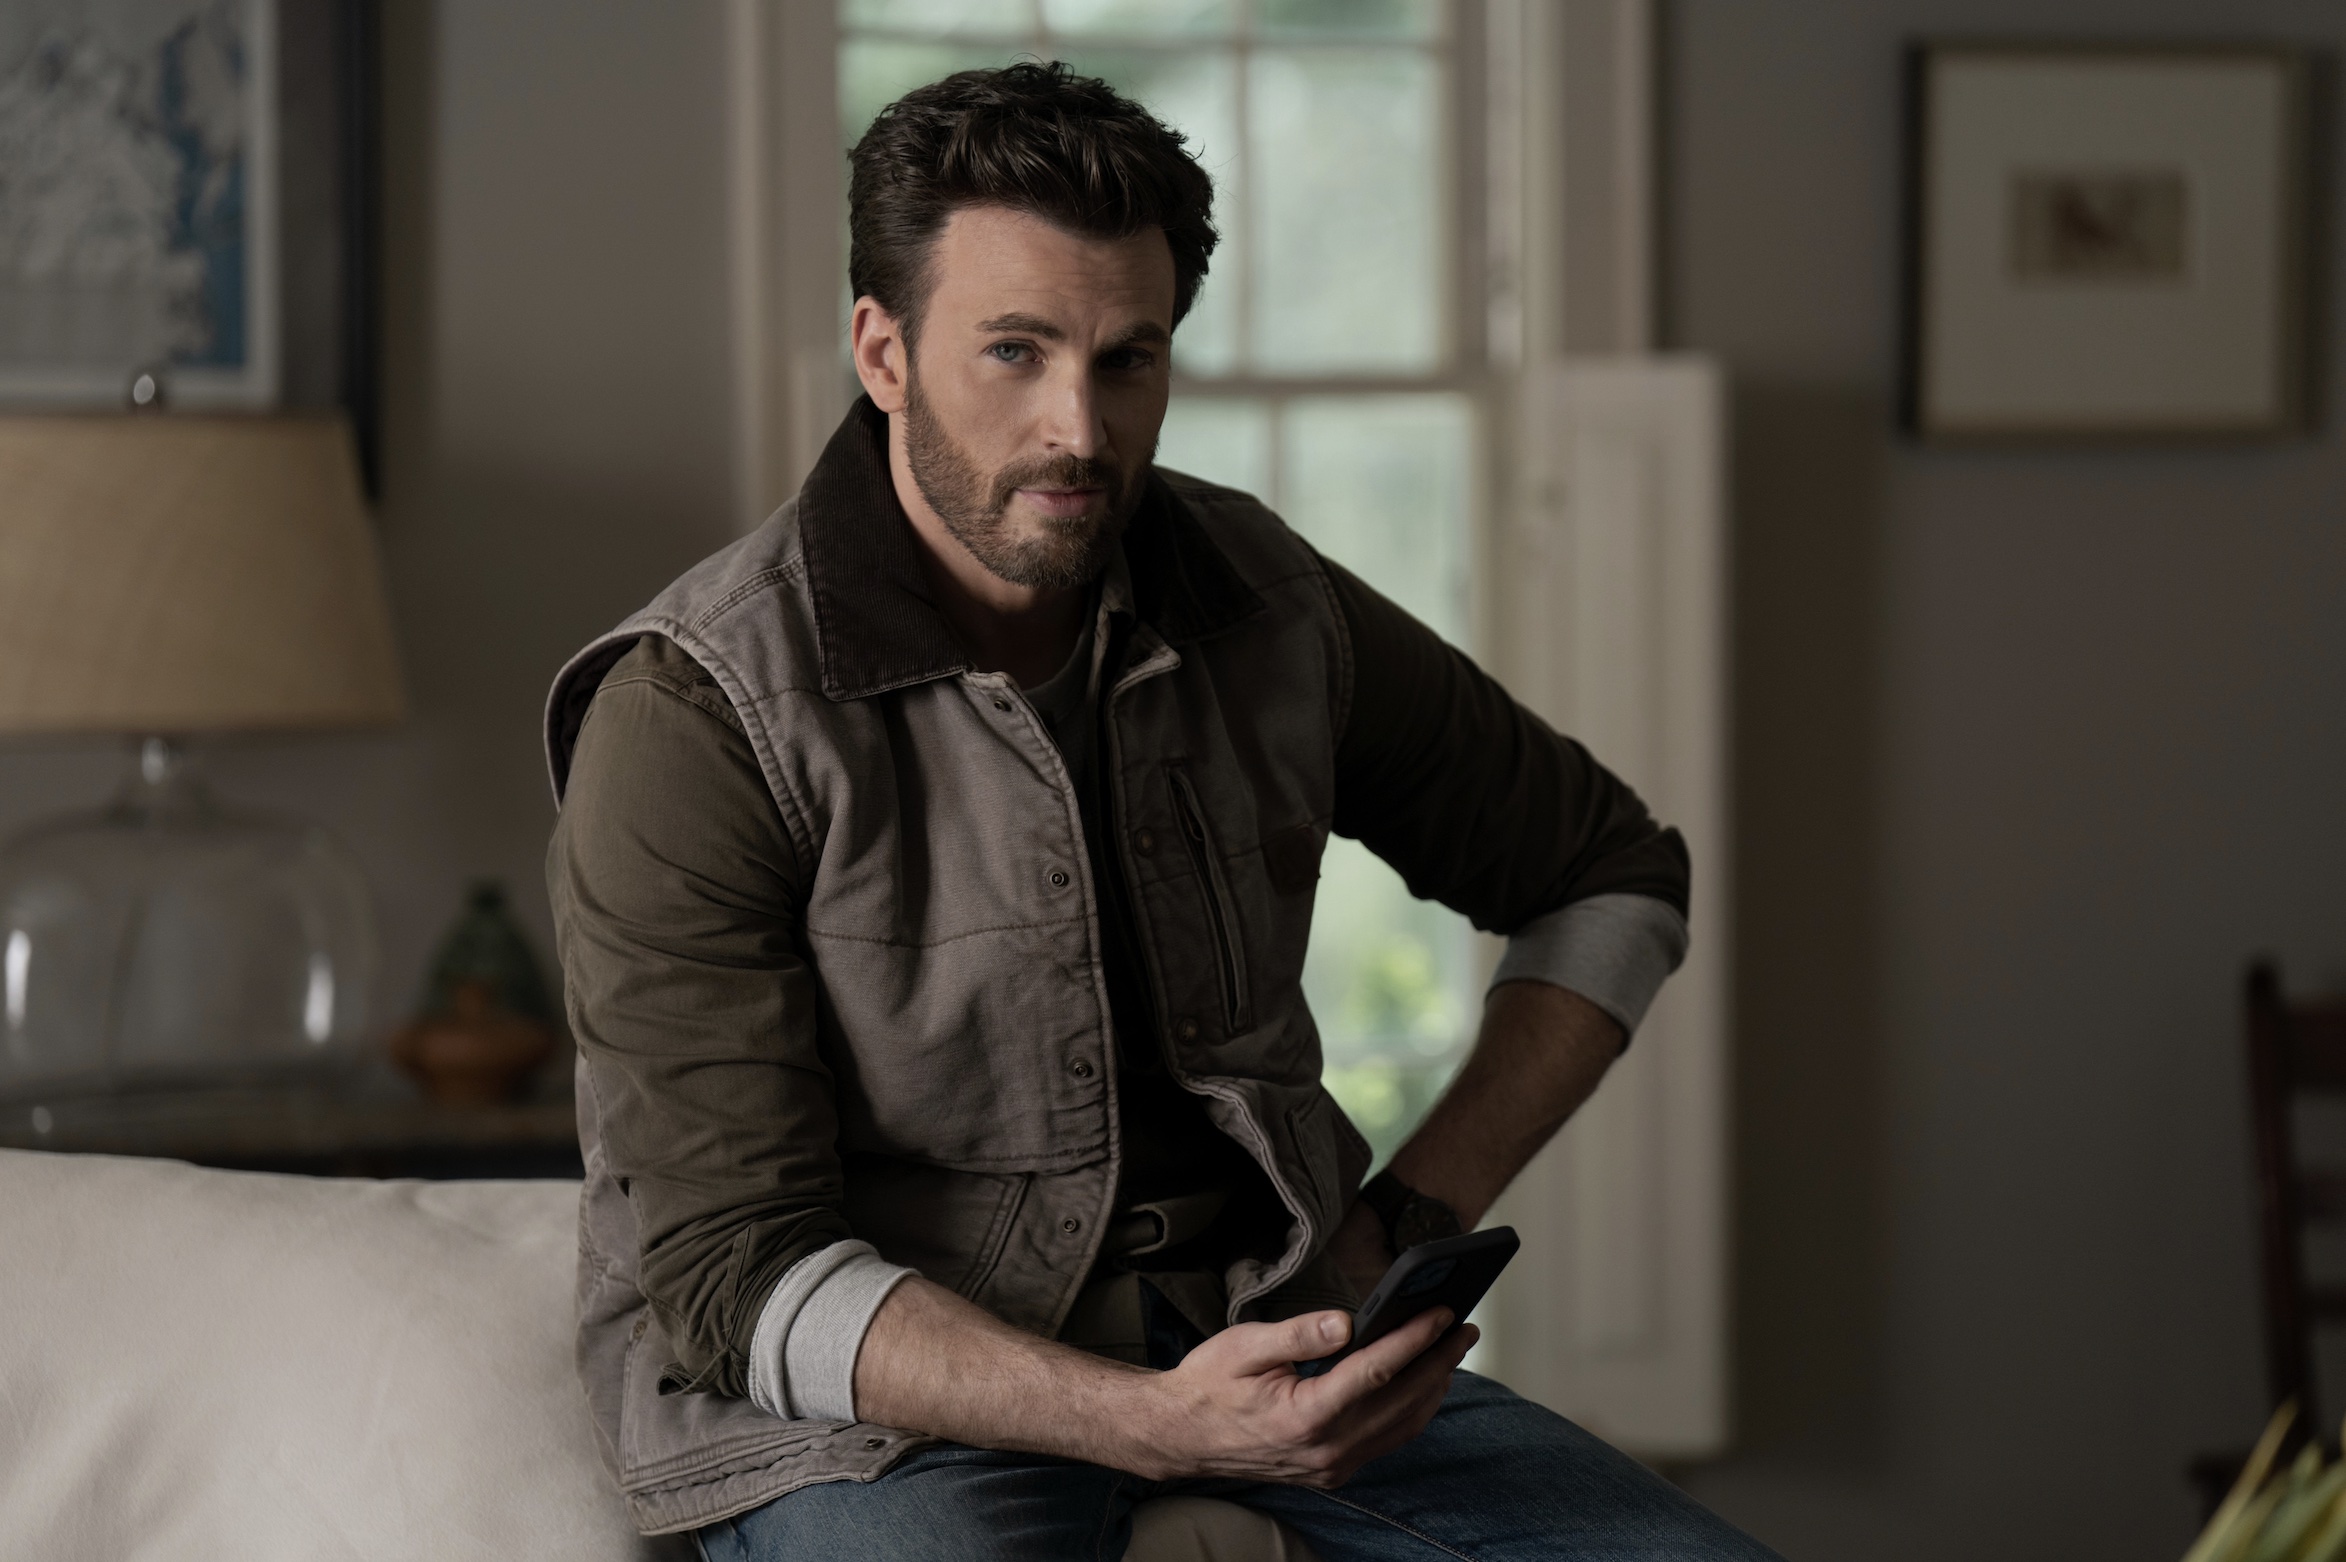 Ghosted Cast on Apple TV+ - Chris Evans as Cole Turner